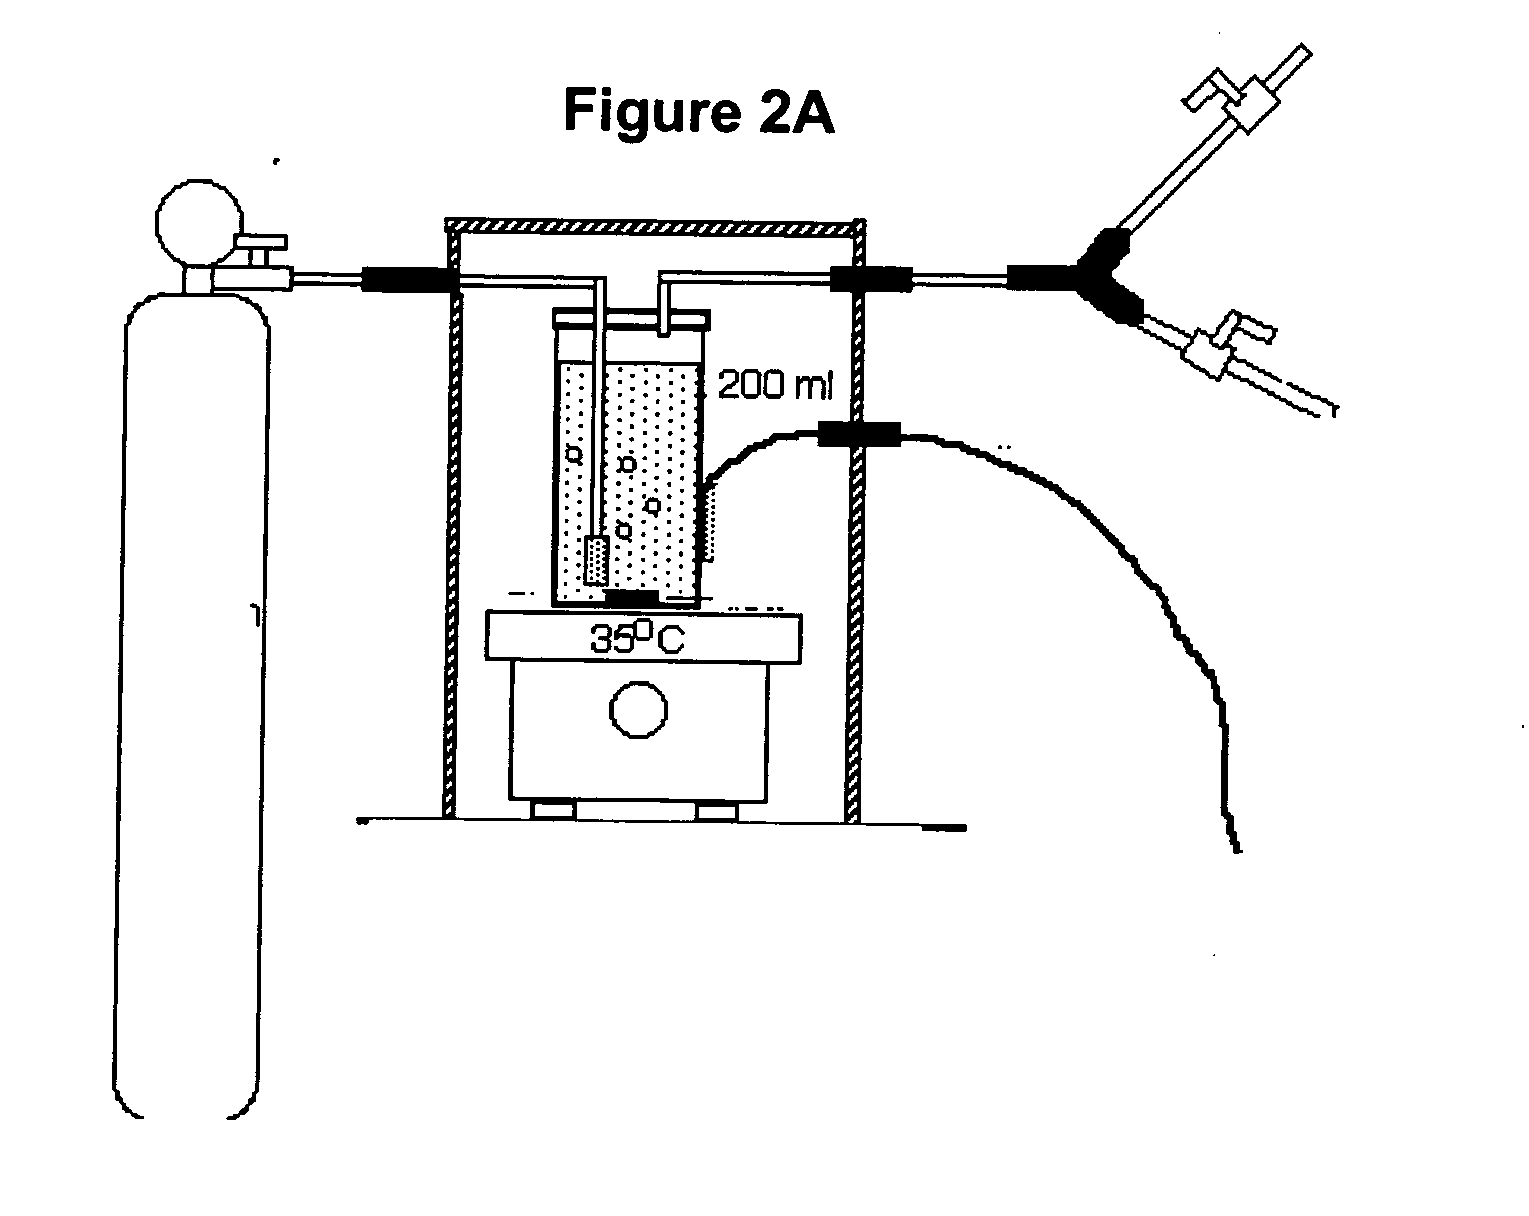 Methods and apparatus for patient monitoring